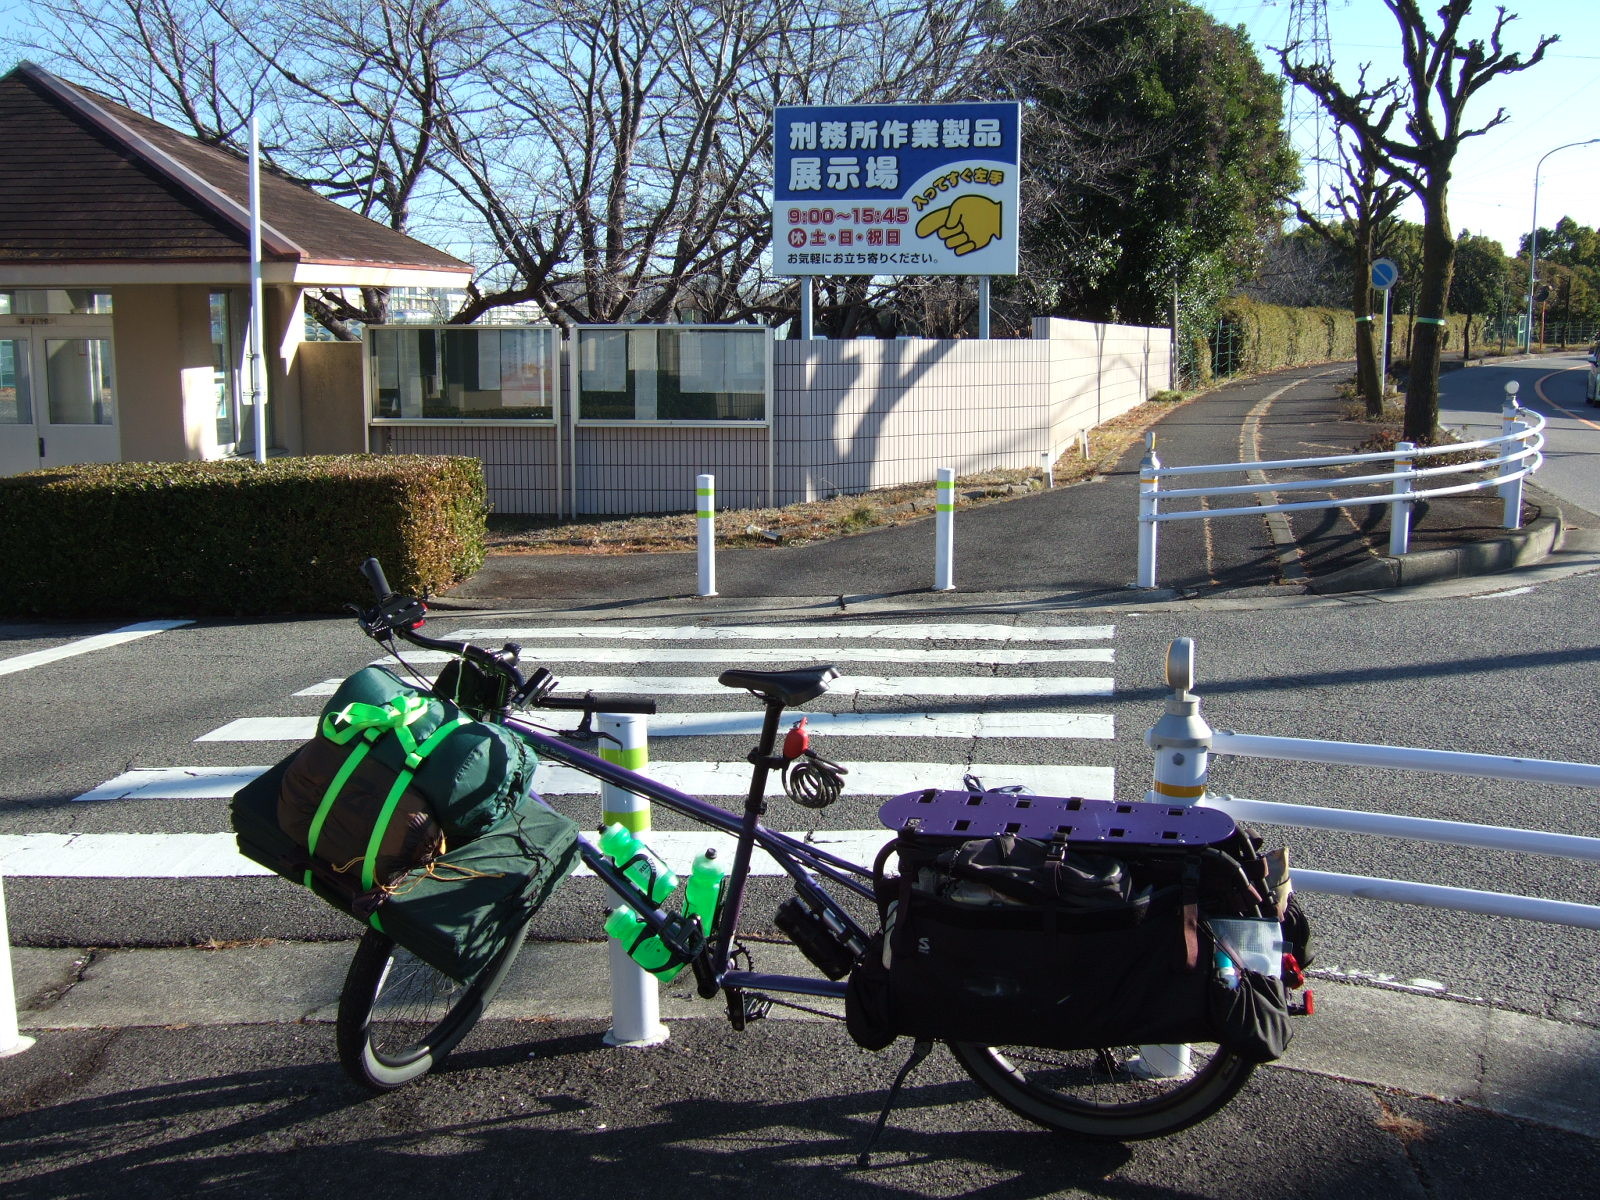 A loaded cargo bicycle parked at a zebra crossing spanning the entrance to the grounds of a prison. On the far side of the zebra crossing is a sign reading “Exhibition Gallery of the Products of Prison Labor/Open 9:00-15:45, except Saturdays, Sundays, and Holidays/Immediately to the left of the entrance/Visitors welcome” (刑務所作業製品展示場・９：００−１５：４５㊡土・日・祝日・入ってすぐ左手・お気軽にお立ち寄りください). A cartoon finger points to the opening hours.